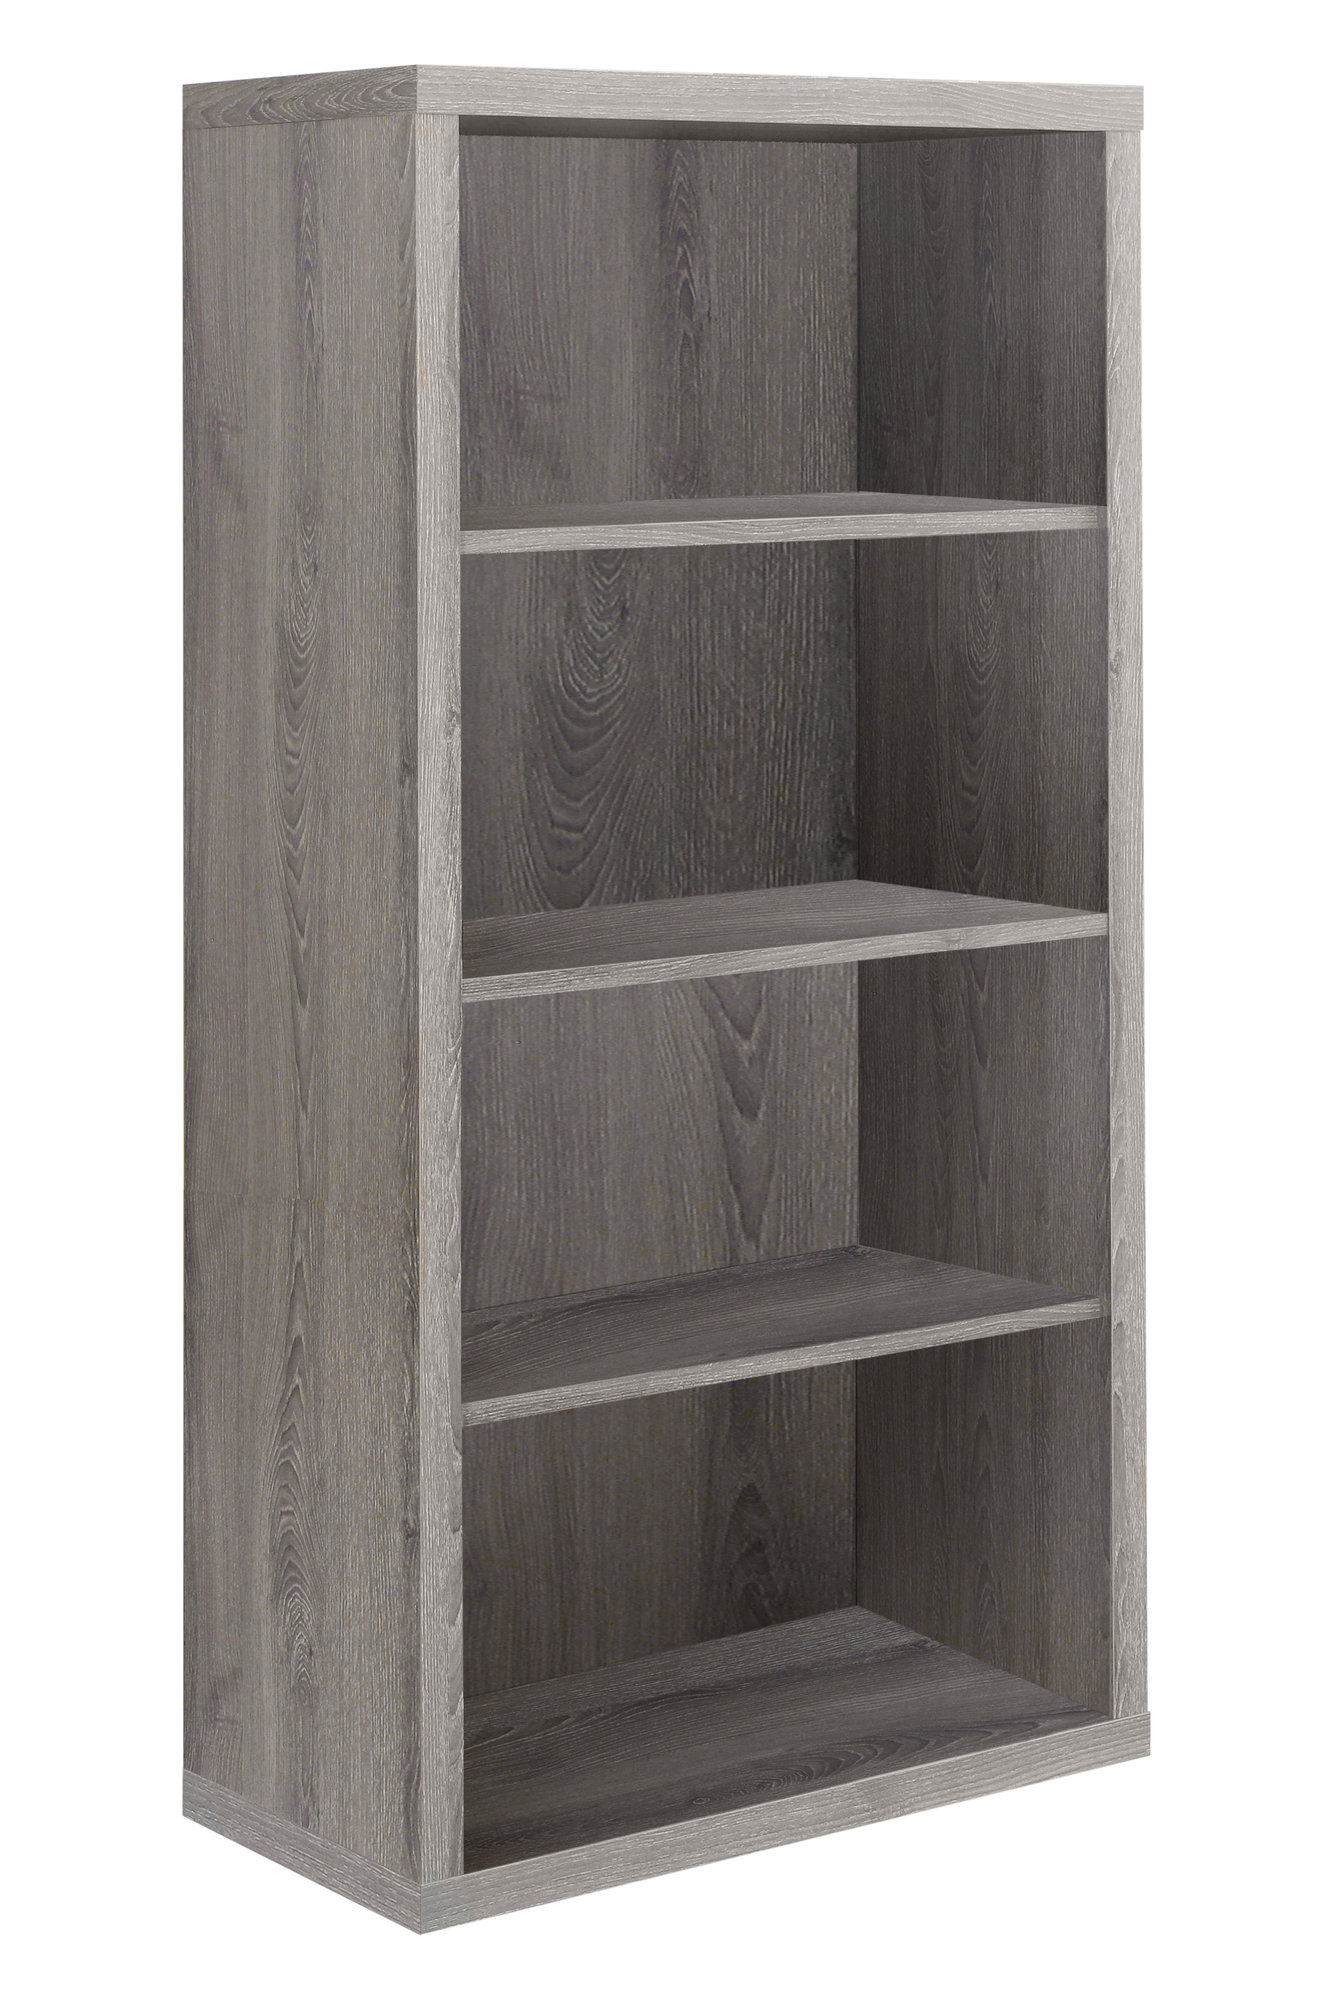 BOOKCASE - 48"H / DARK TAUPE WITH ADJUSTABLE SHELVES